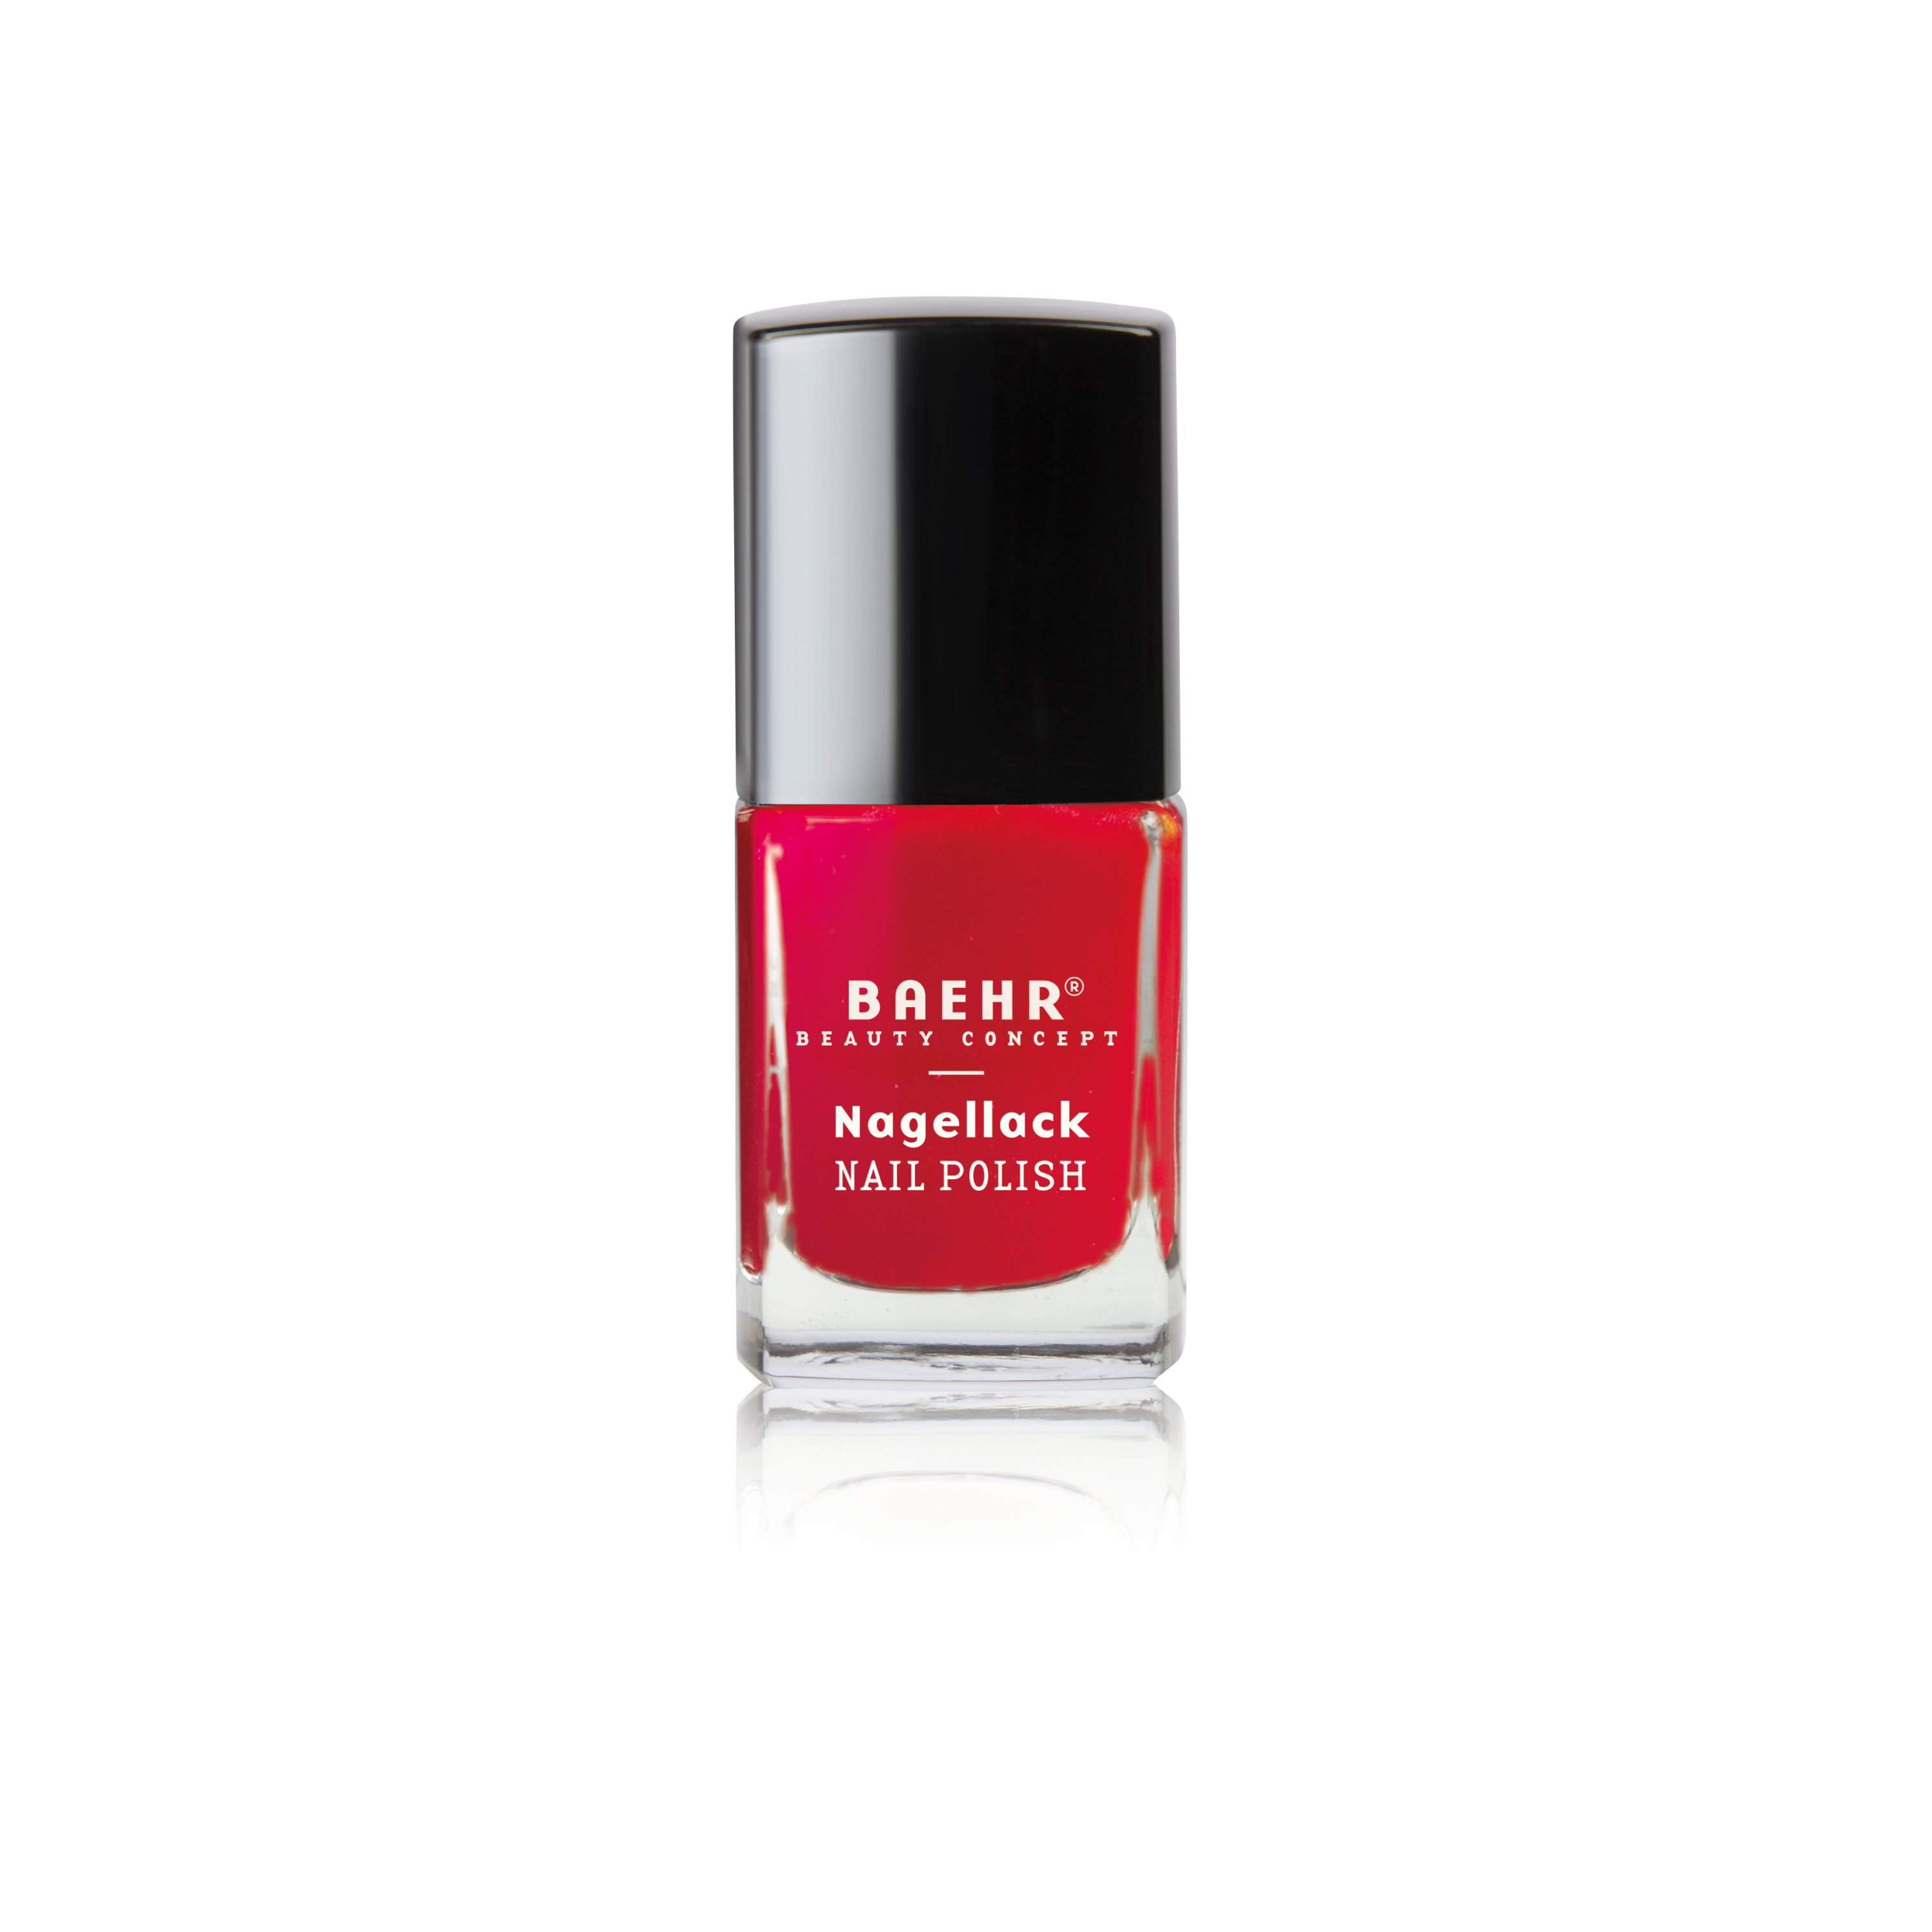 BAEHR BEAUTY CONCEPT - NAILS Nagellack paradise red pearl 11 ml